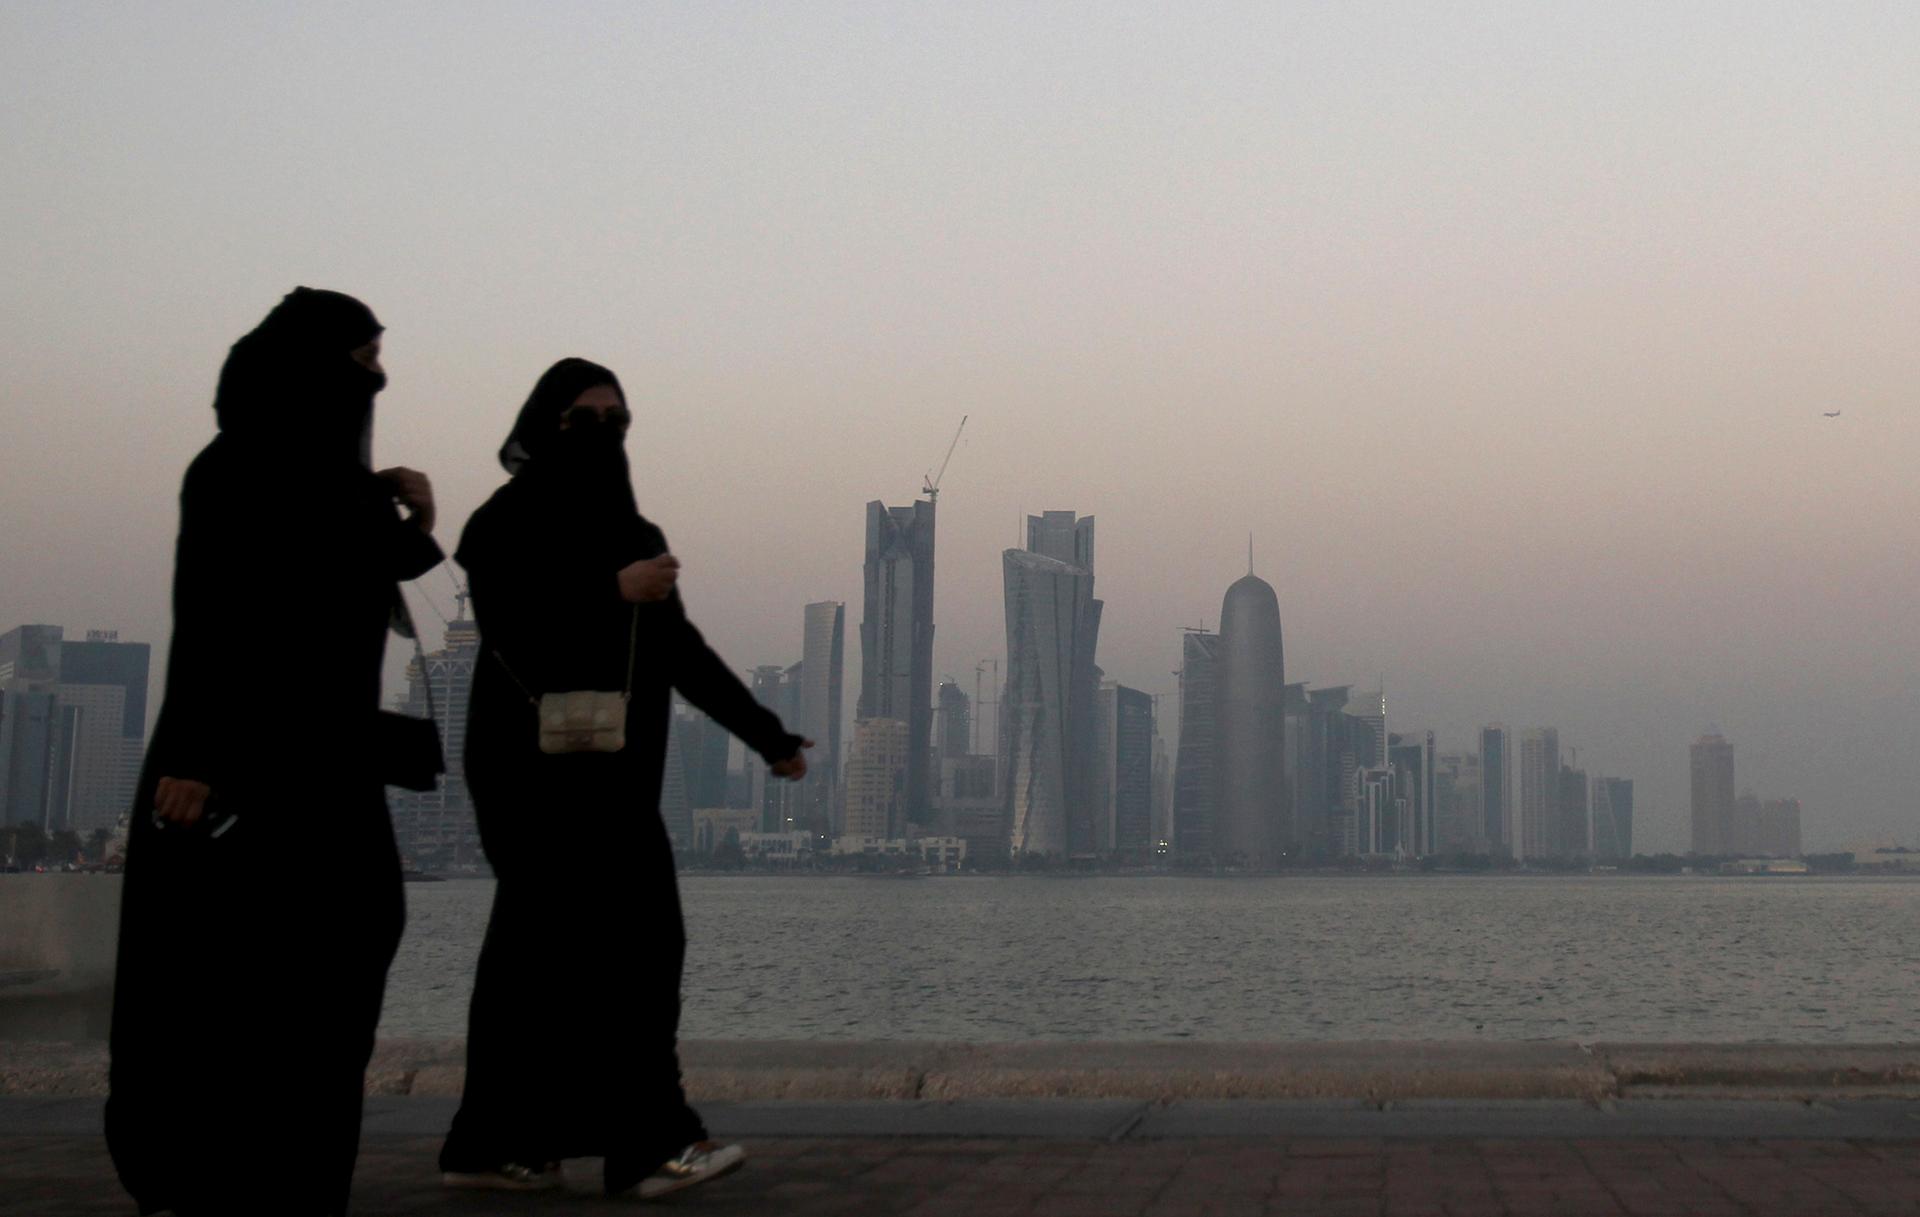 Women walk past buildings as the sun sets in Doha October 19, 2010.